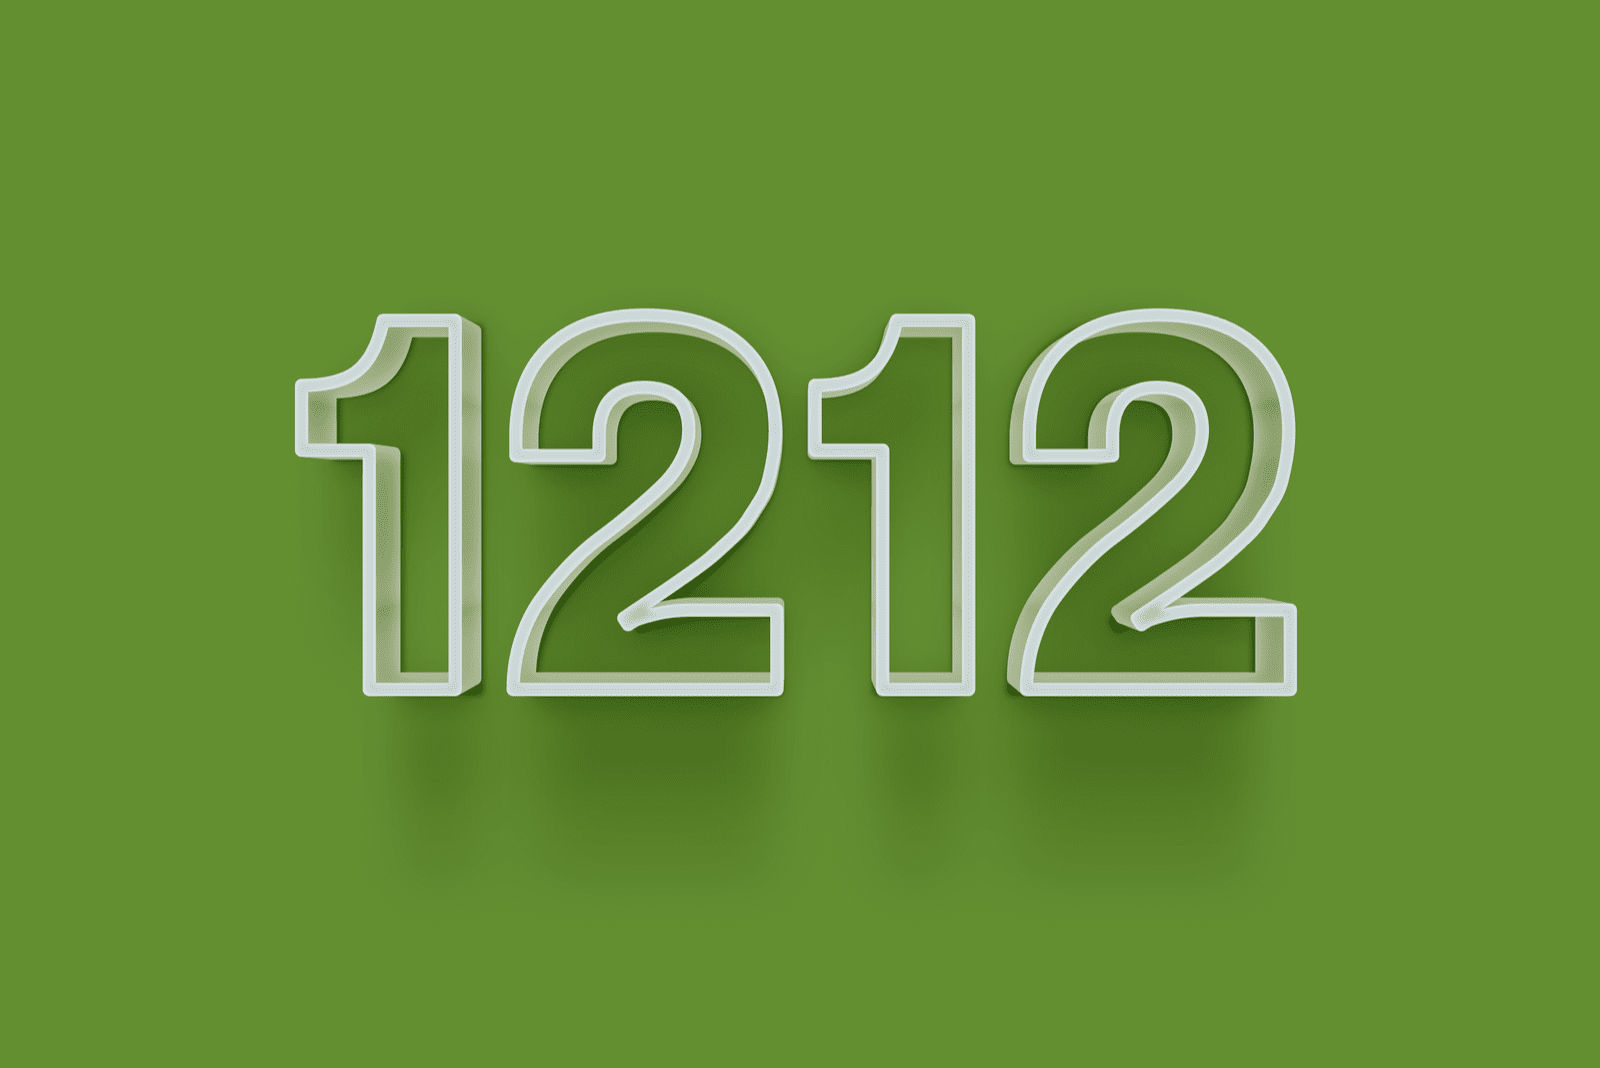 1212 on a green background